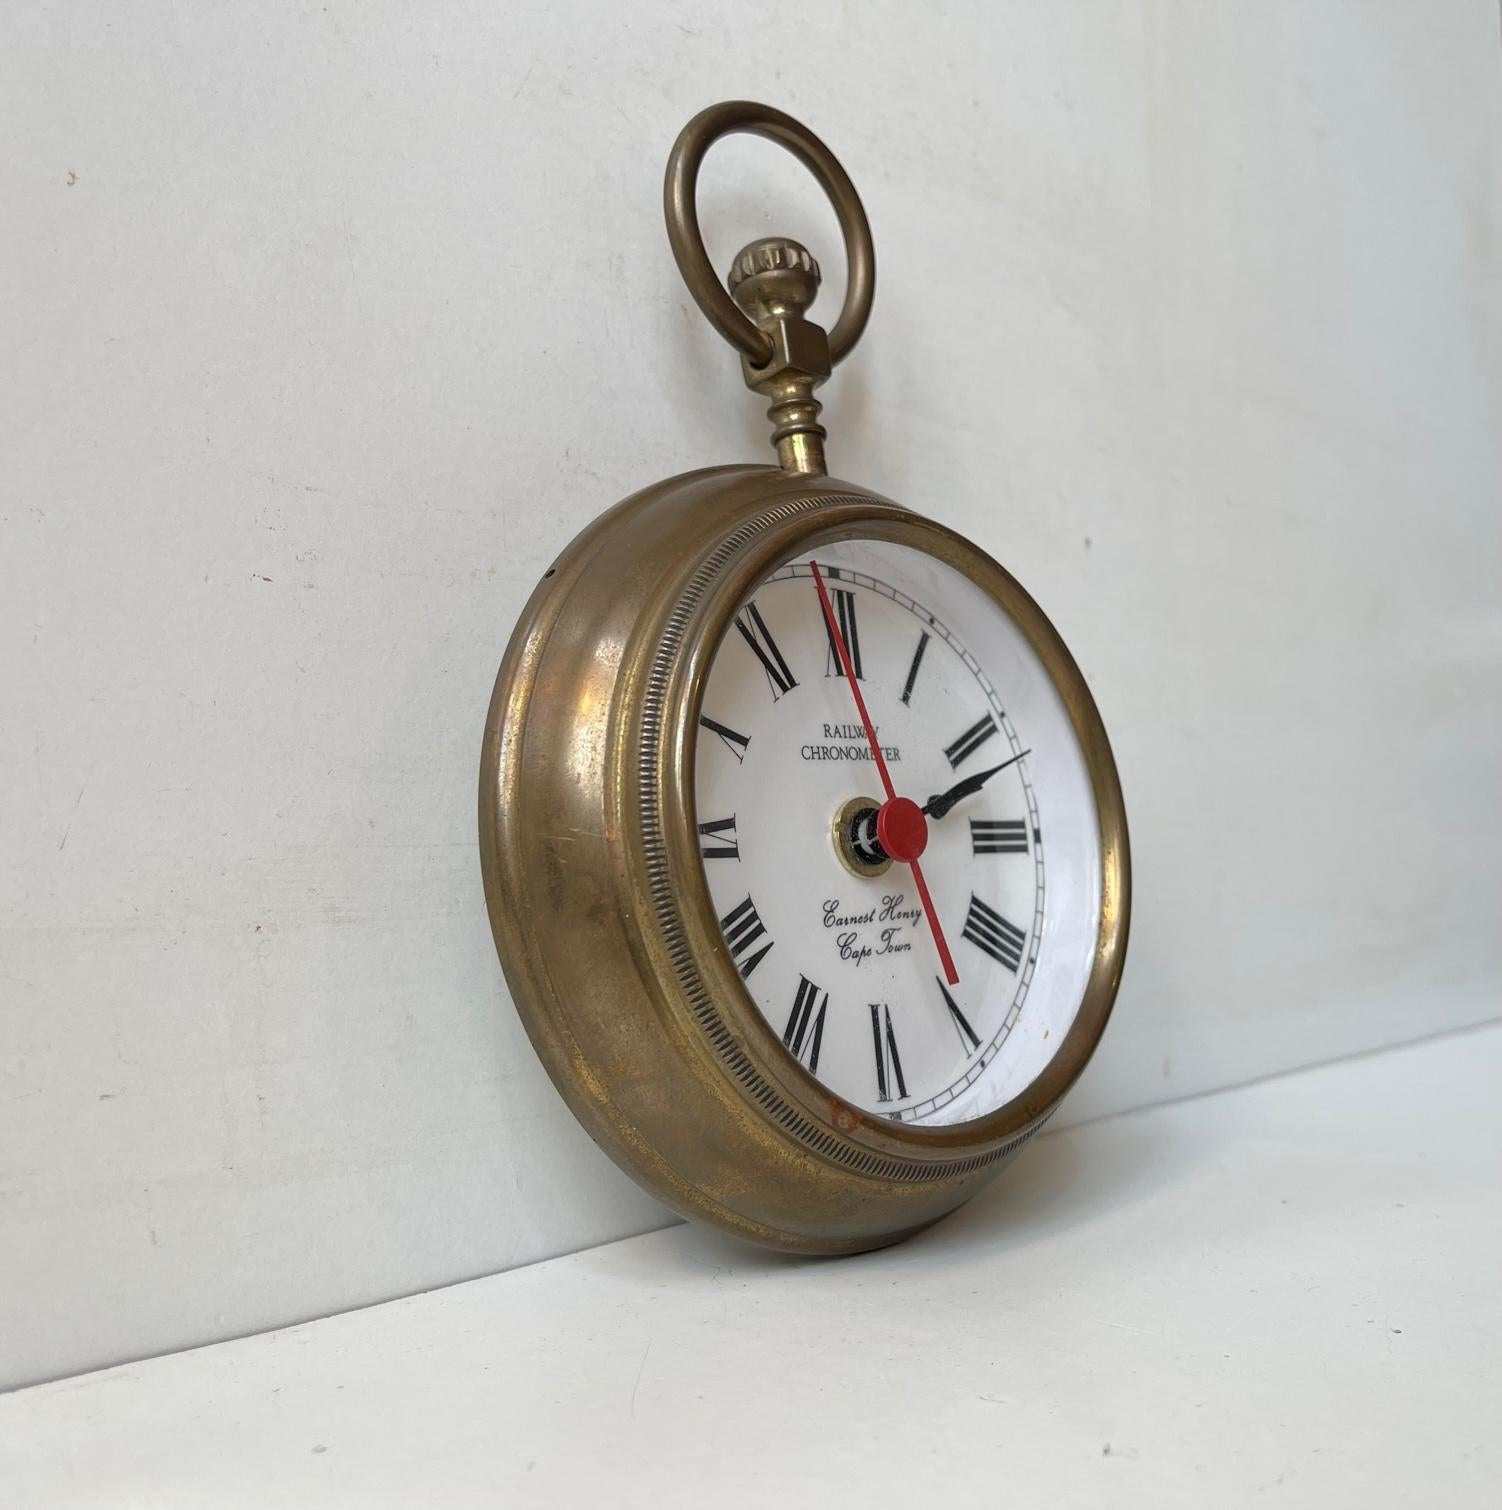 Vintage Railway Chronometer - Brass Jumbo Pocket Watch or Wall Clock In Good Condition For Sale In Esbjerg, DK